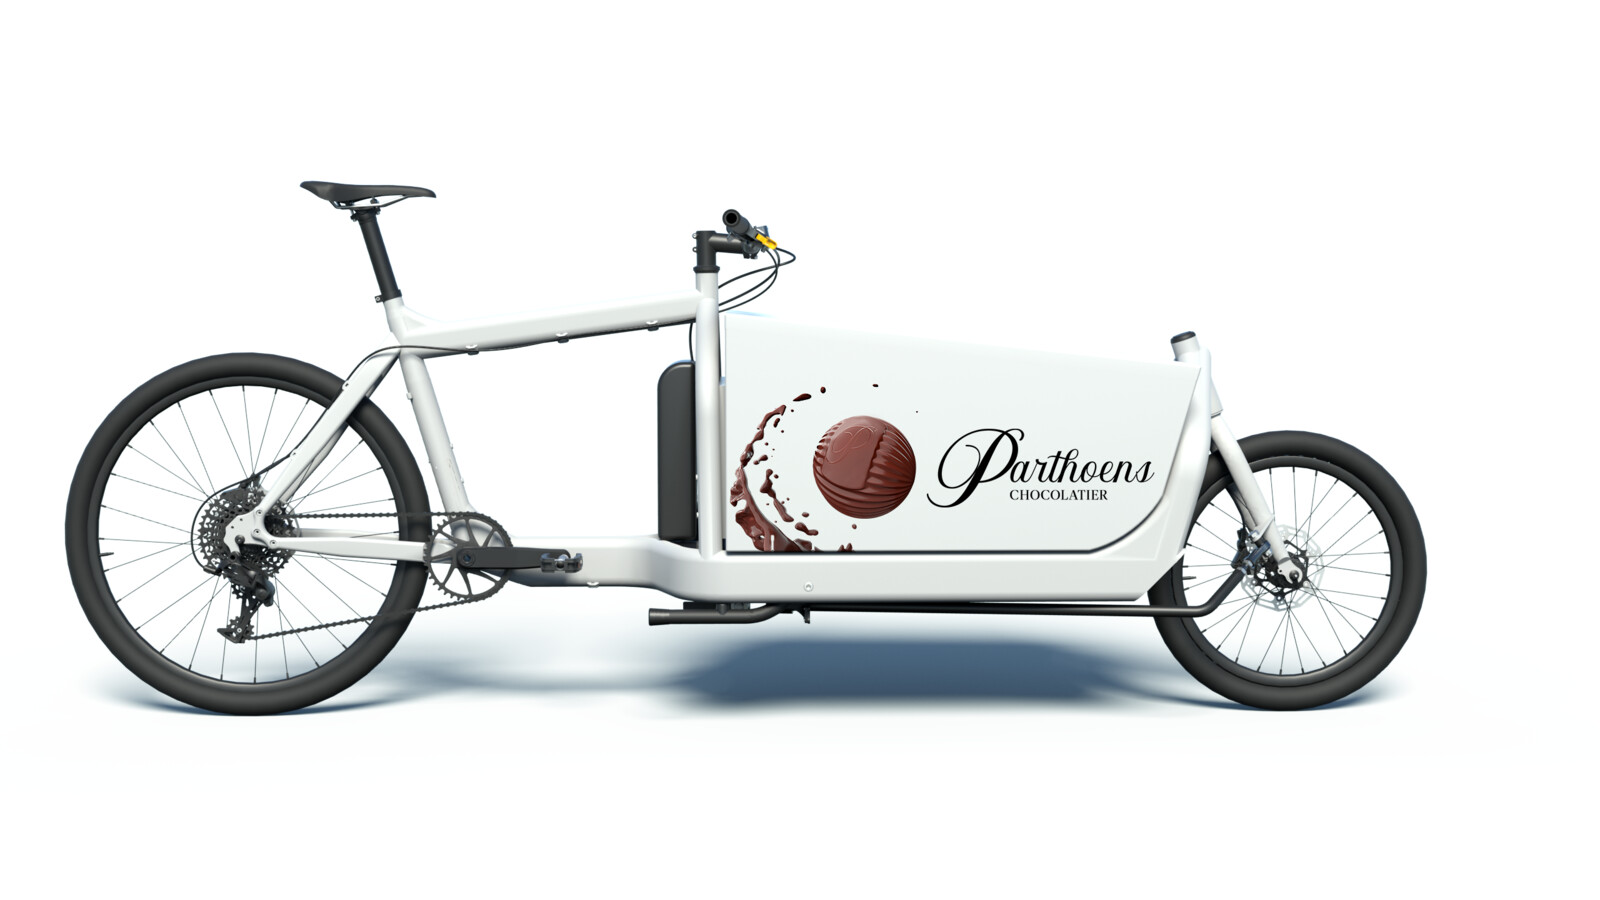 The last-mile delivery goes bakfiets and in style to the customer. Full 3D.